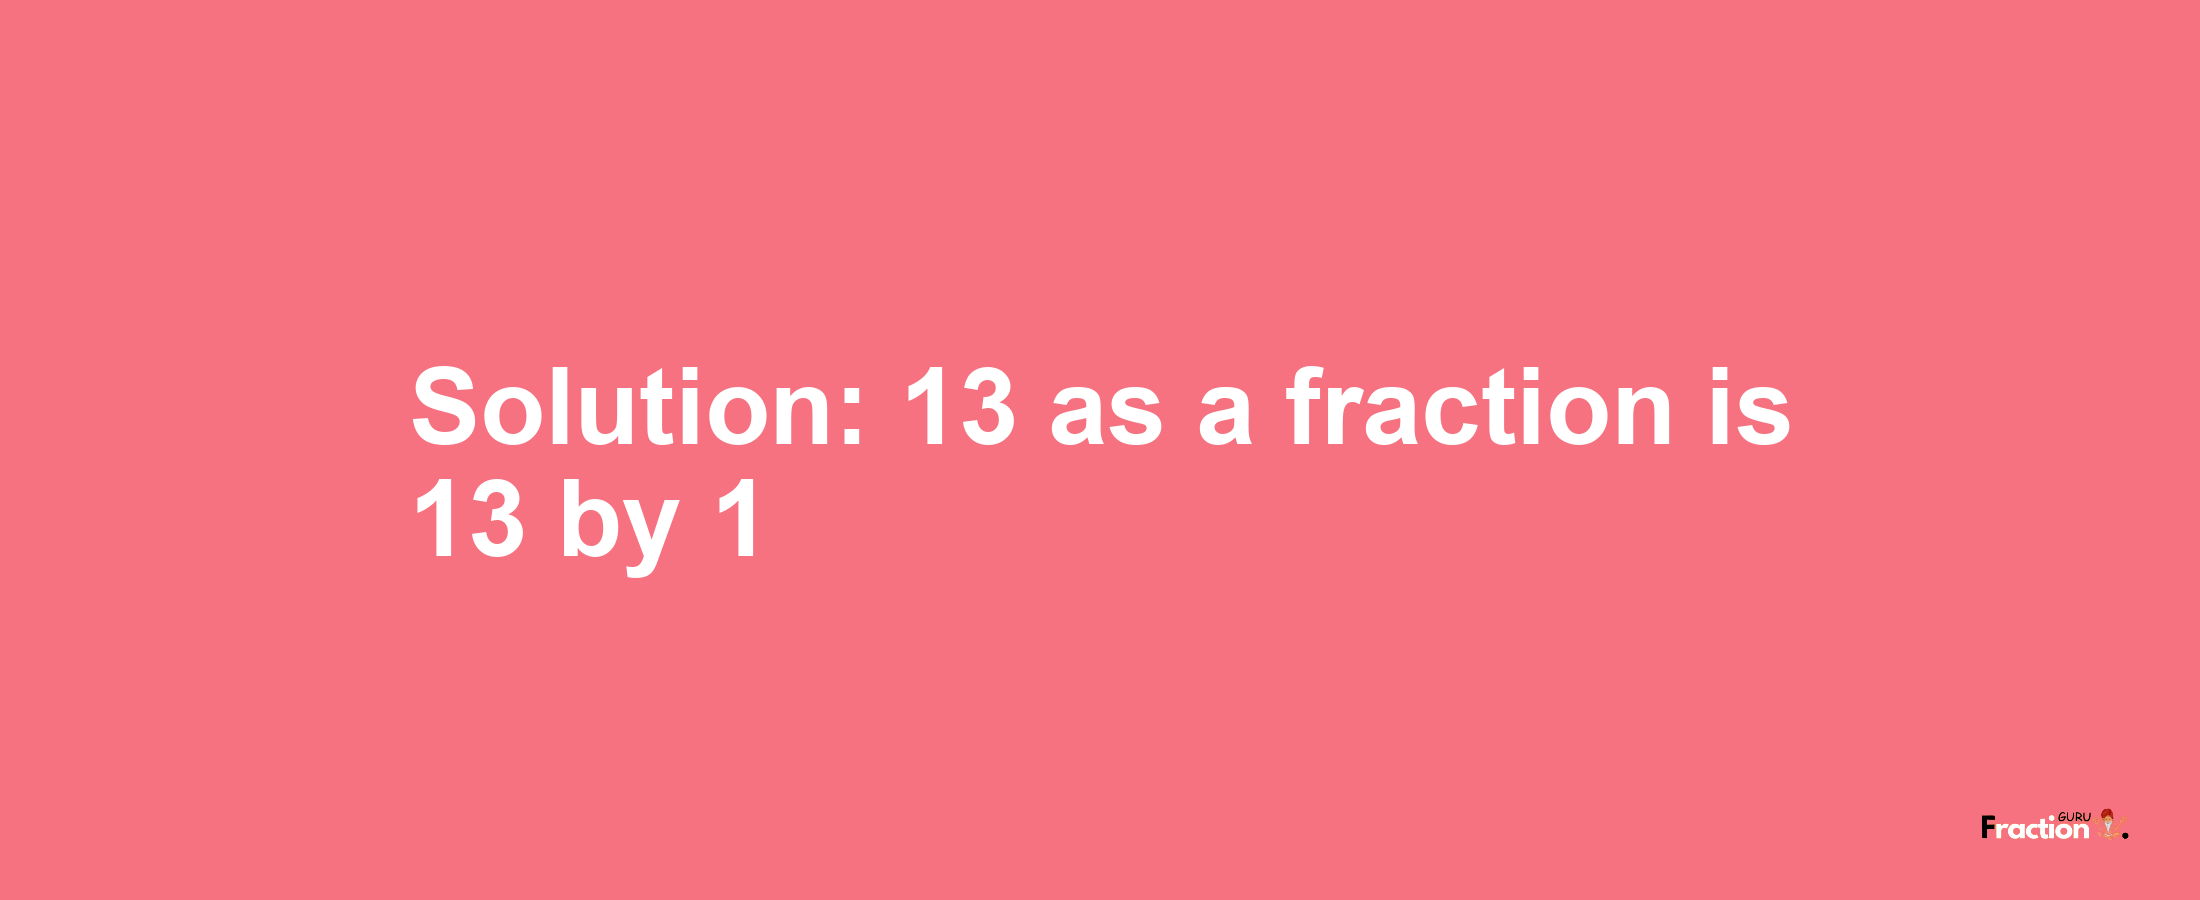 Solution:13 as a fraction is 13/1